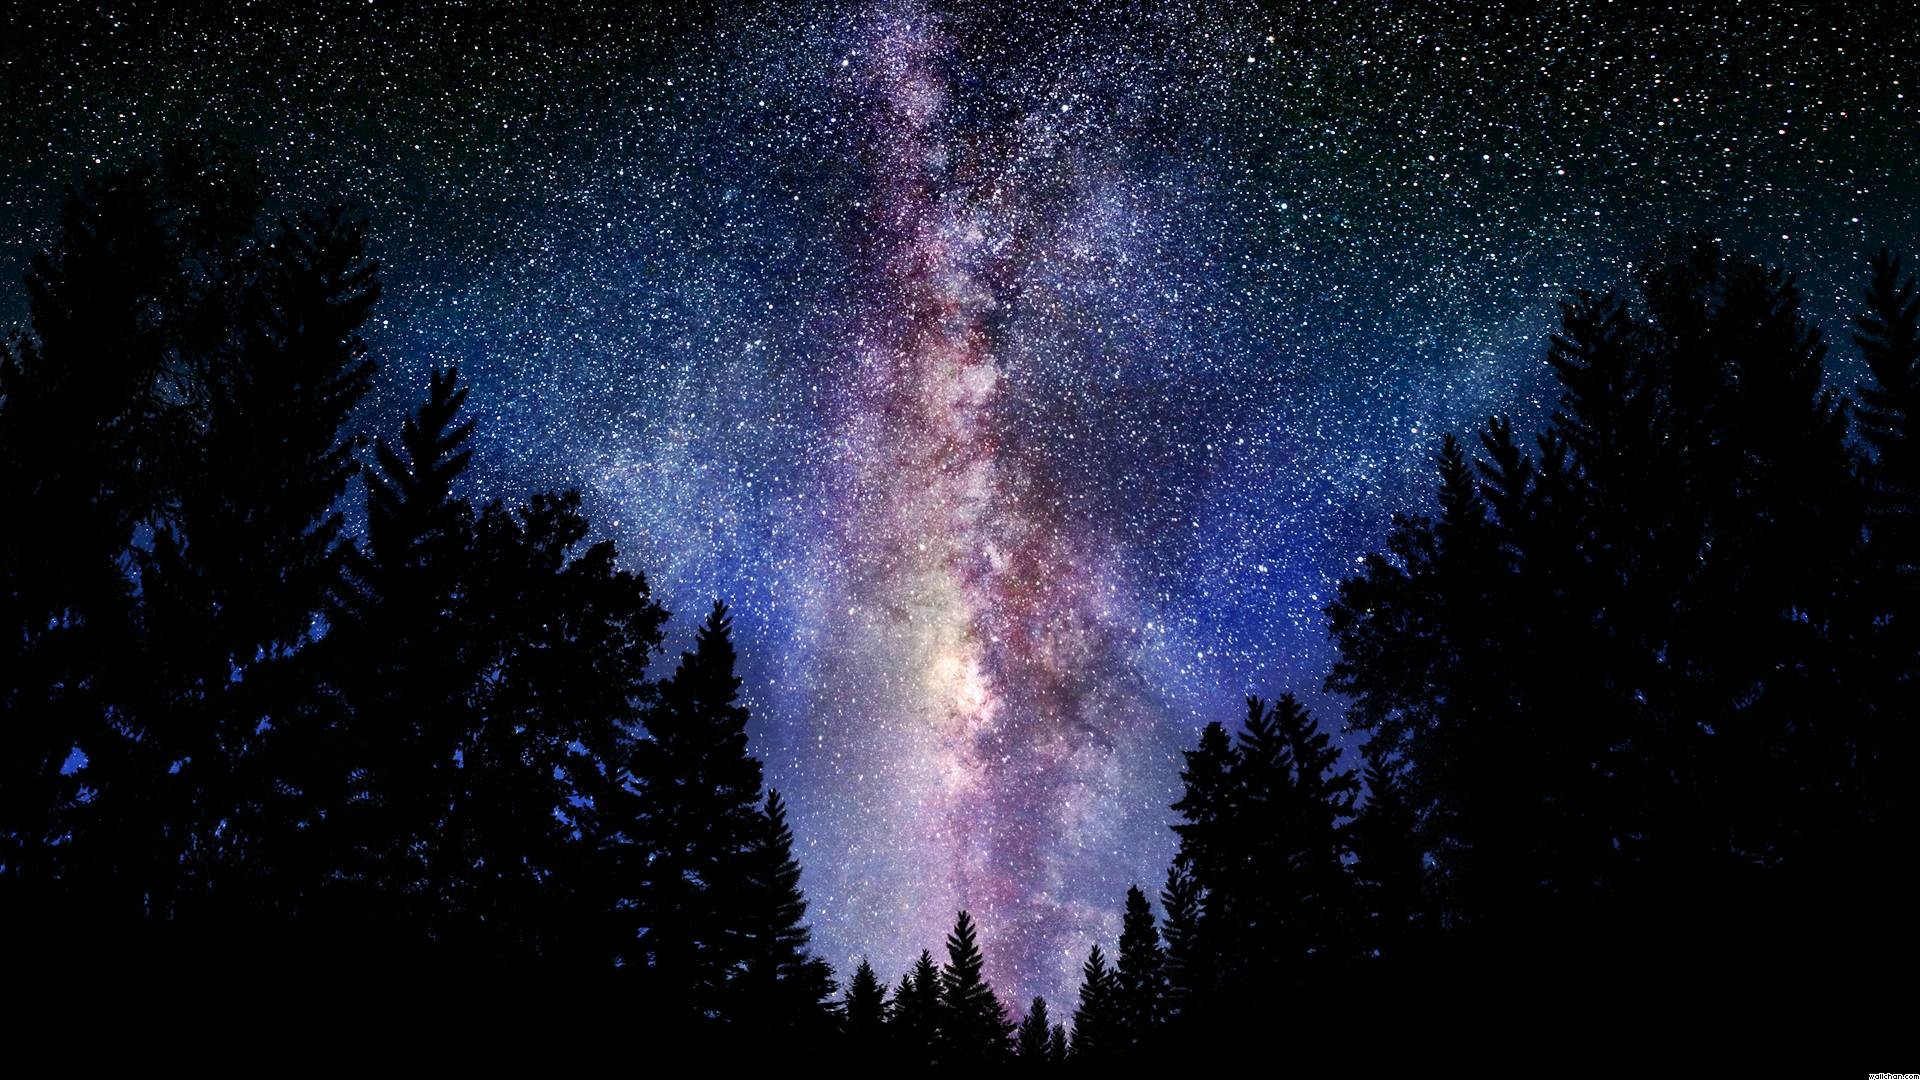 1920x1080 Milky Way Wallpaper 40 60457 Images HD Wallpapers| Wallpapers .